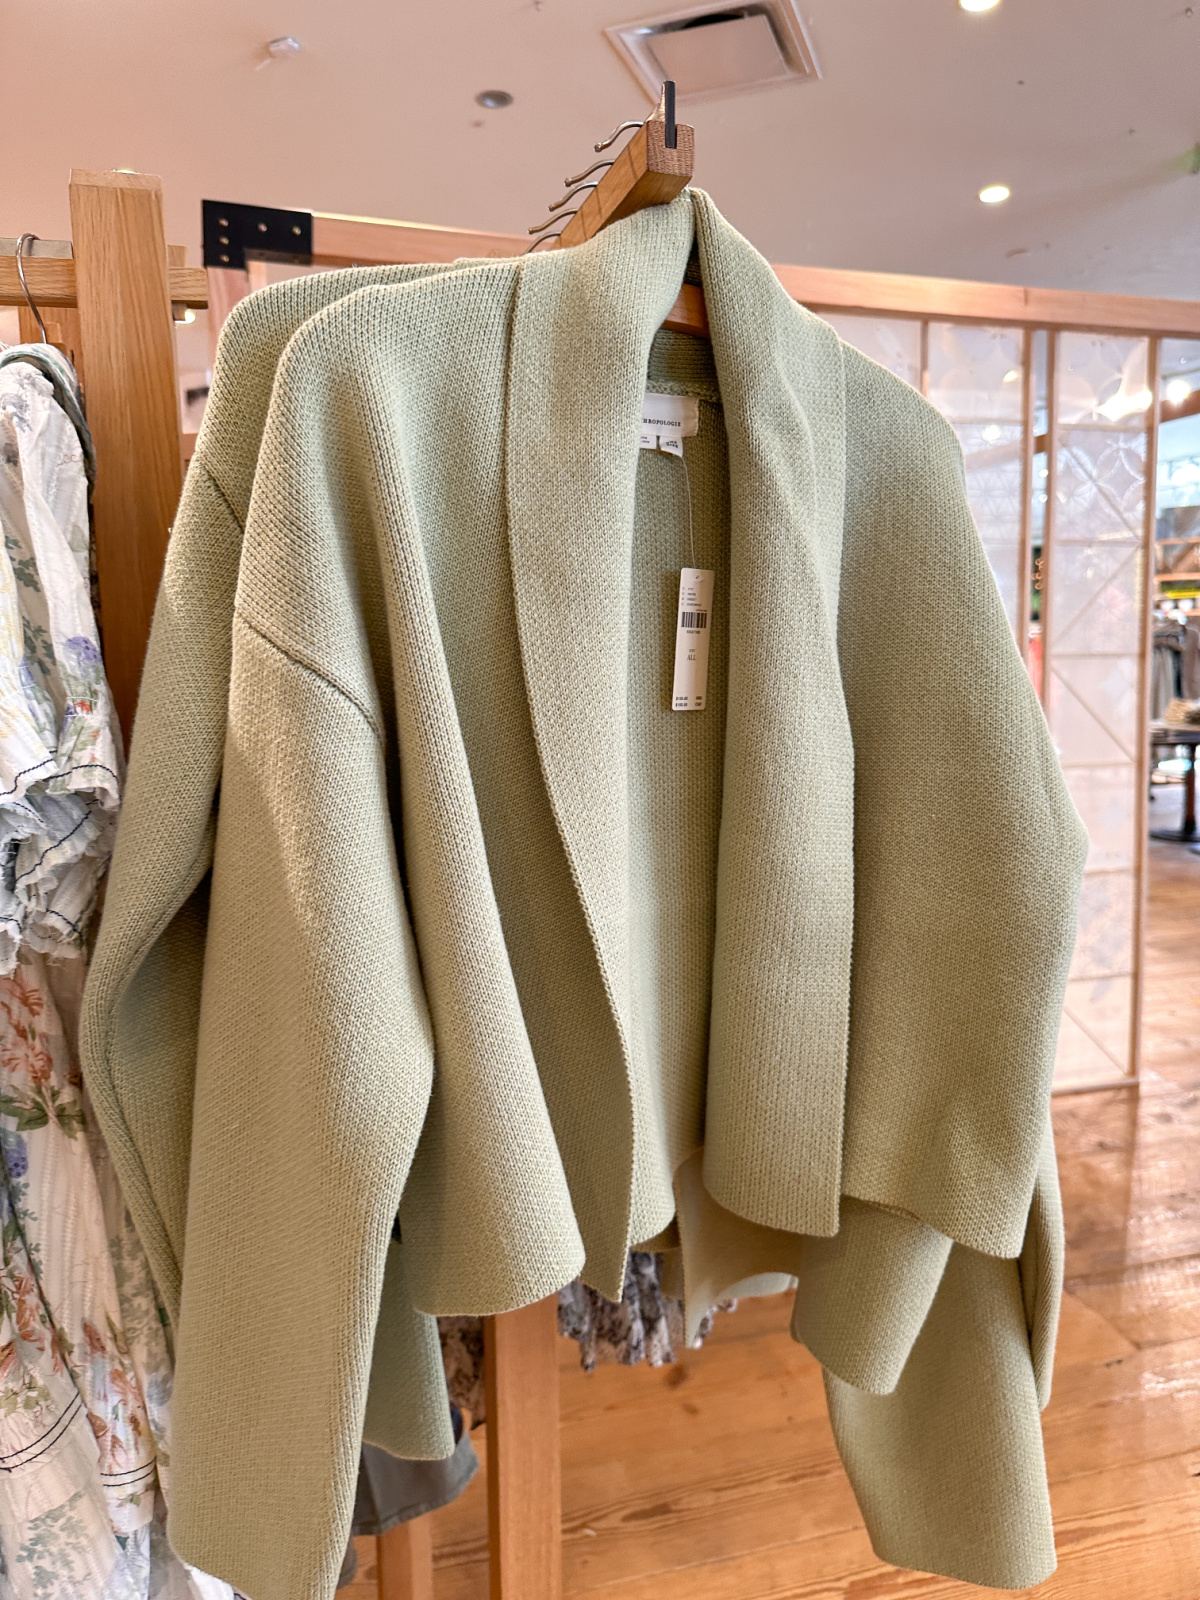 Green cardigans on rack at Anthropology.